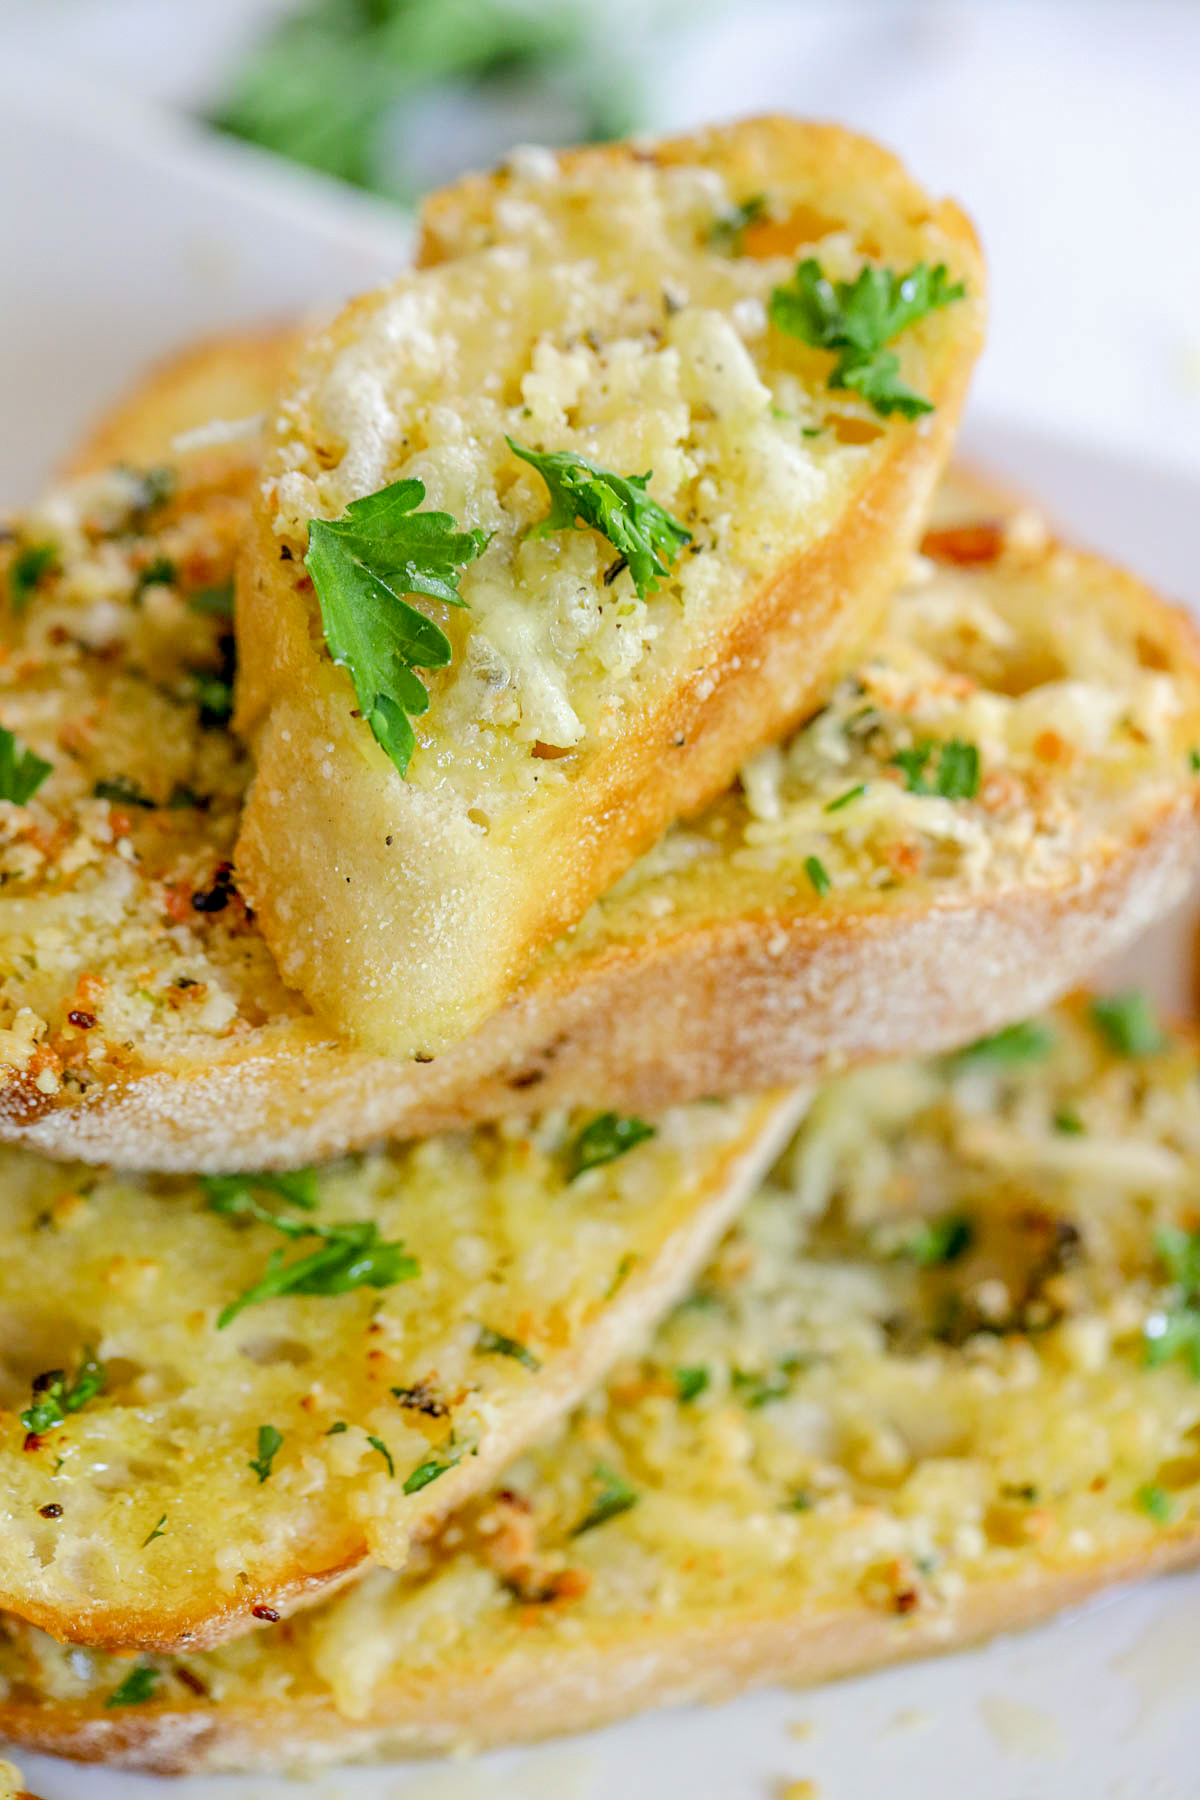 stack of garlic bread slices with parsley as a garnish